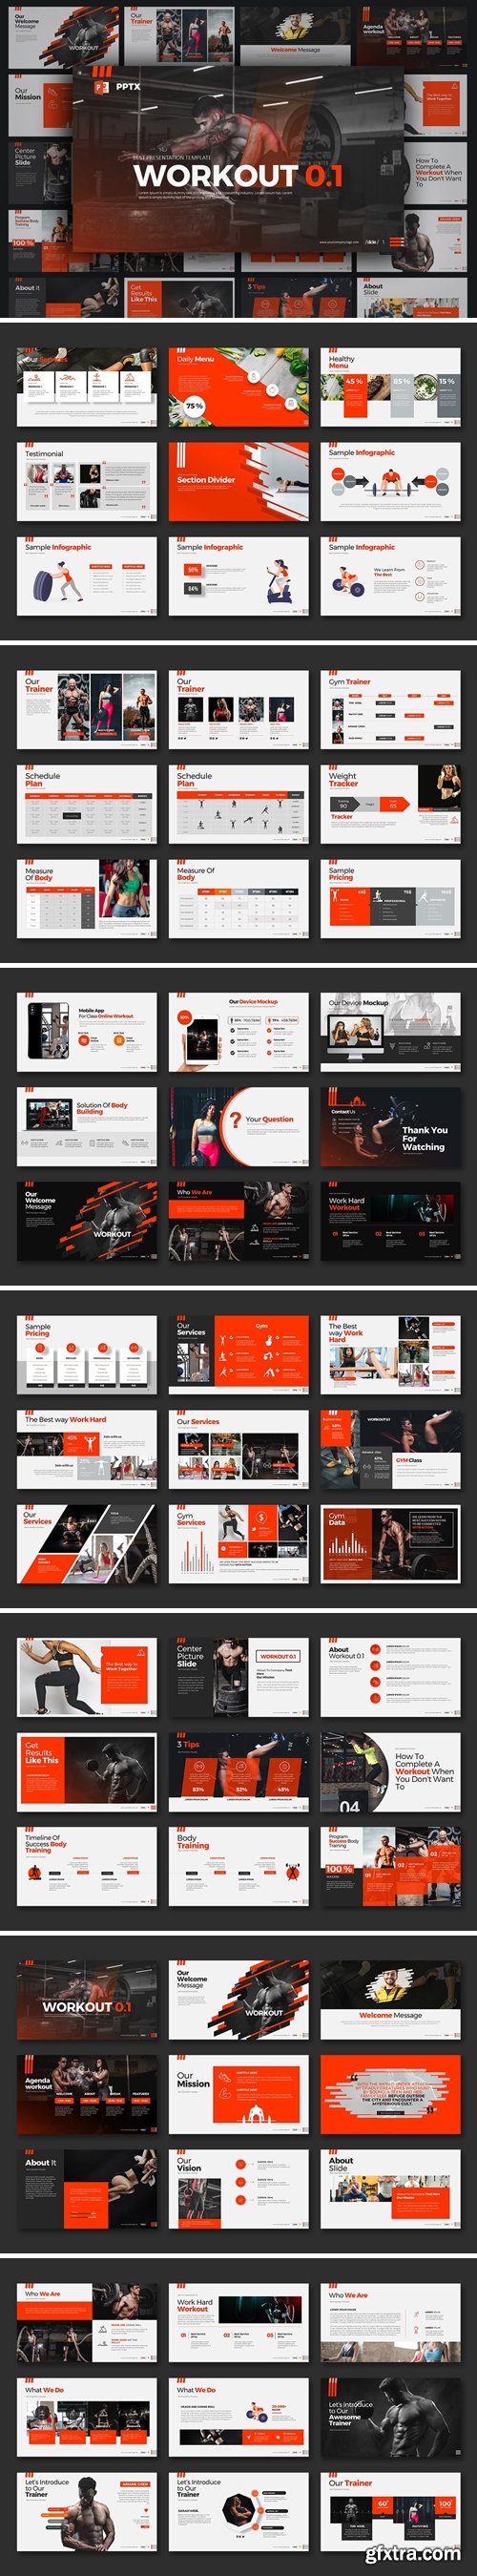 WORKOUT 0.1 PowerPoint and Keynote Presentation